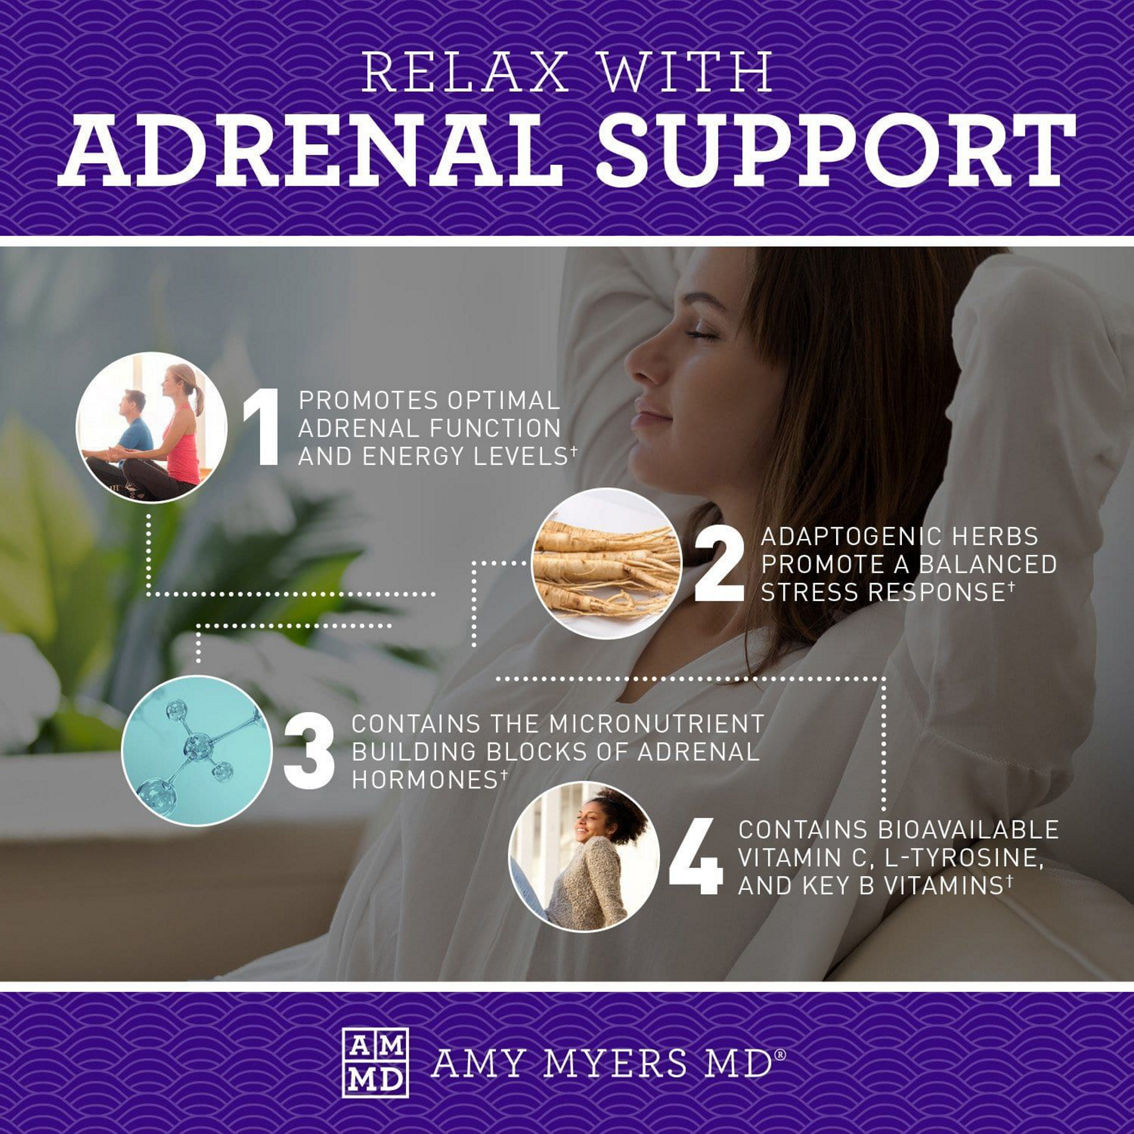 Amy Myers MD Adrenal Support - Image 2 of 2